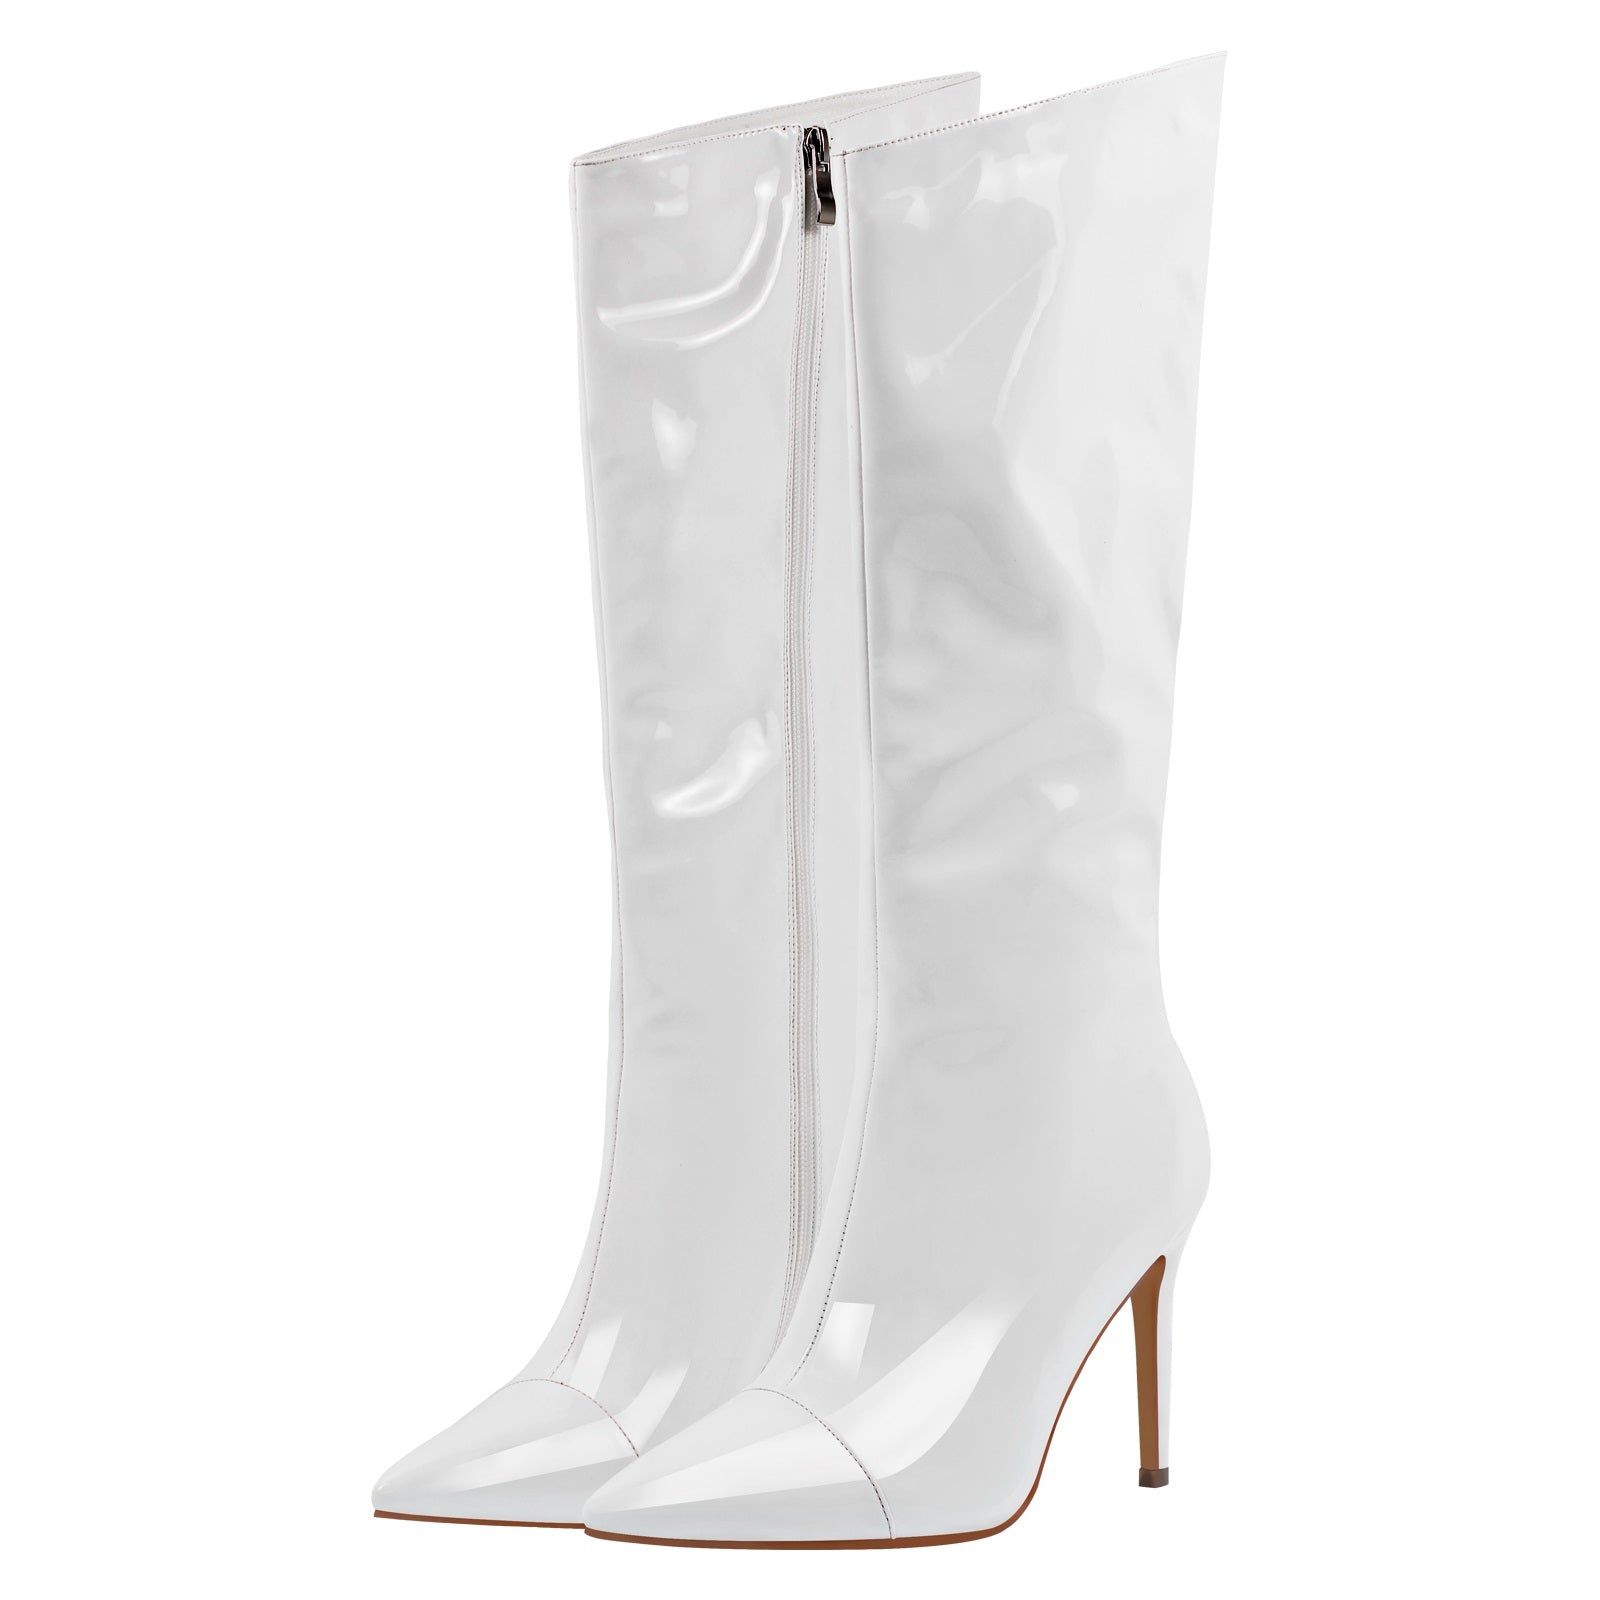 Patent Leather Pointed Toe Knee High Boots – Onlymaker